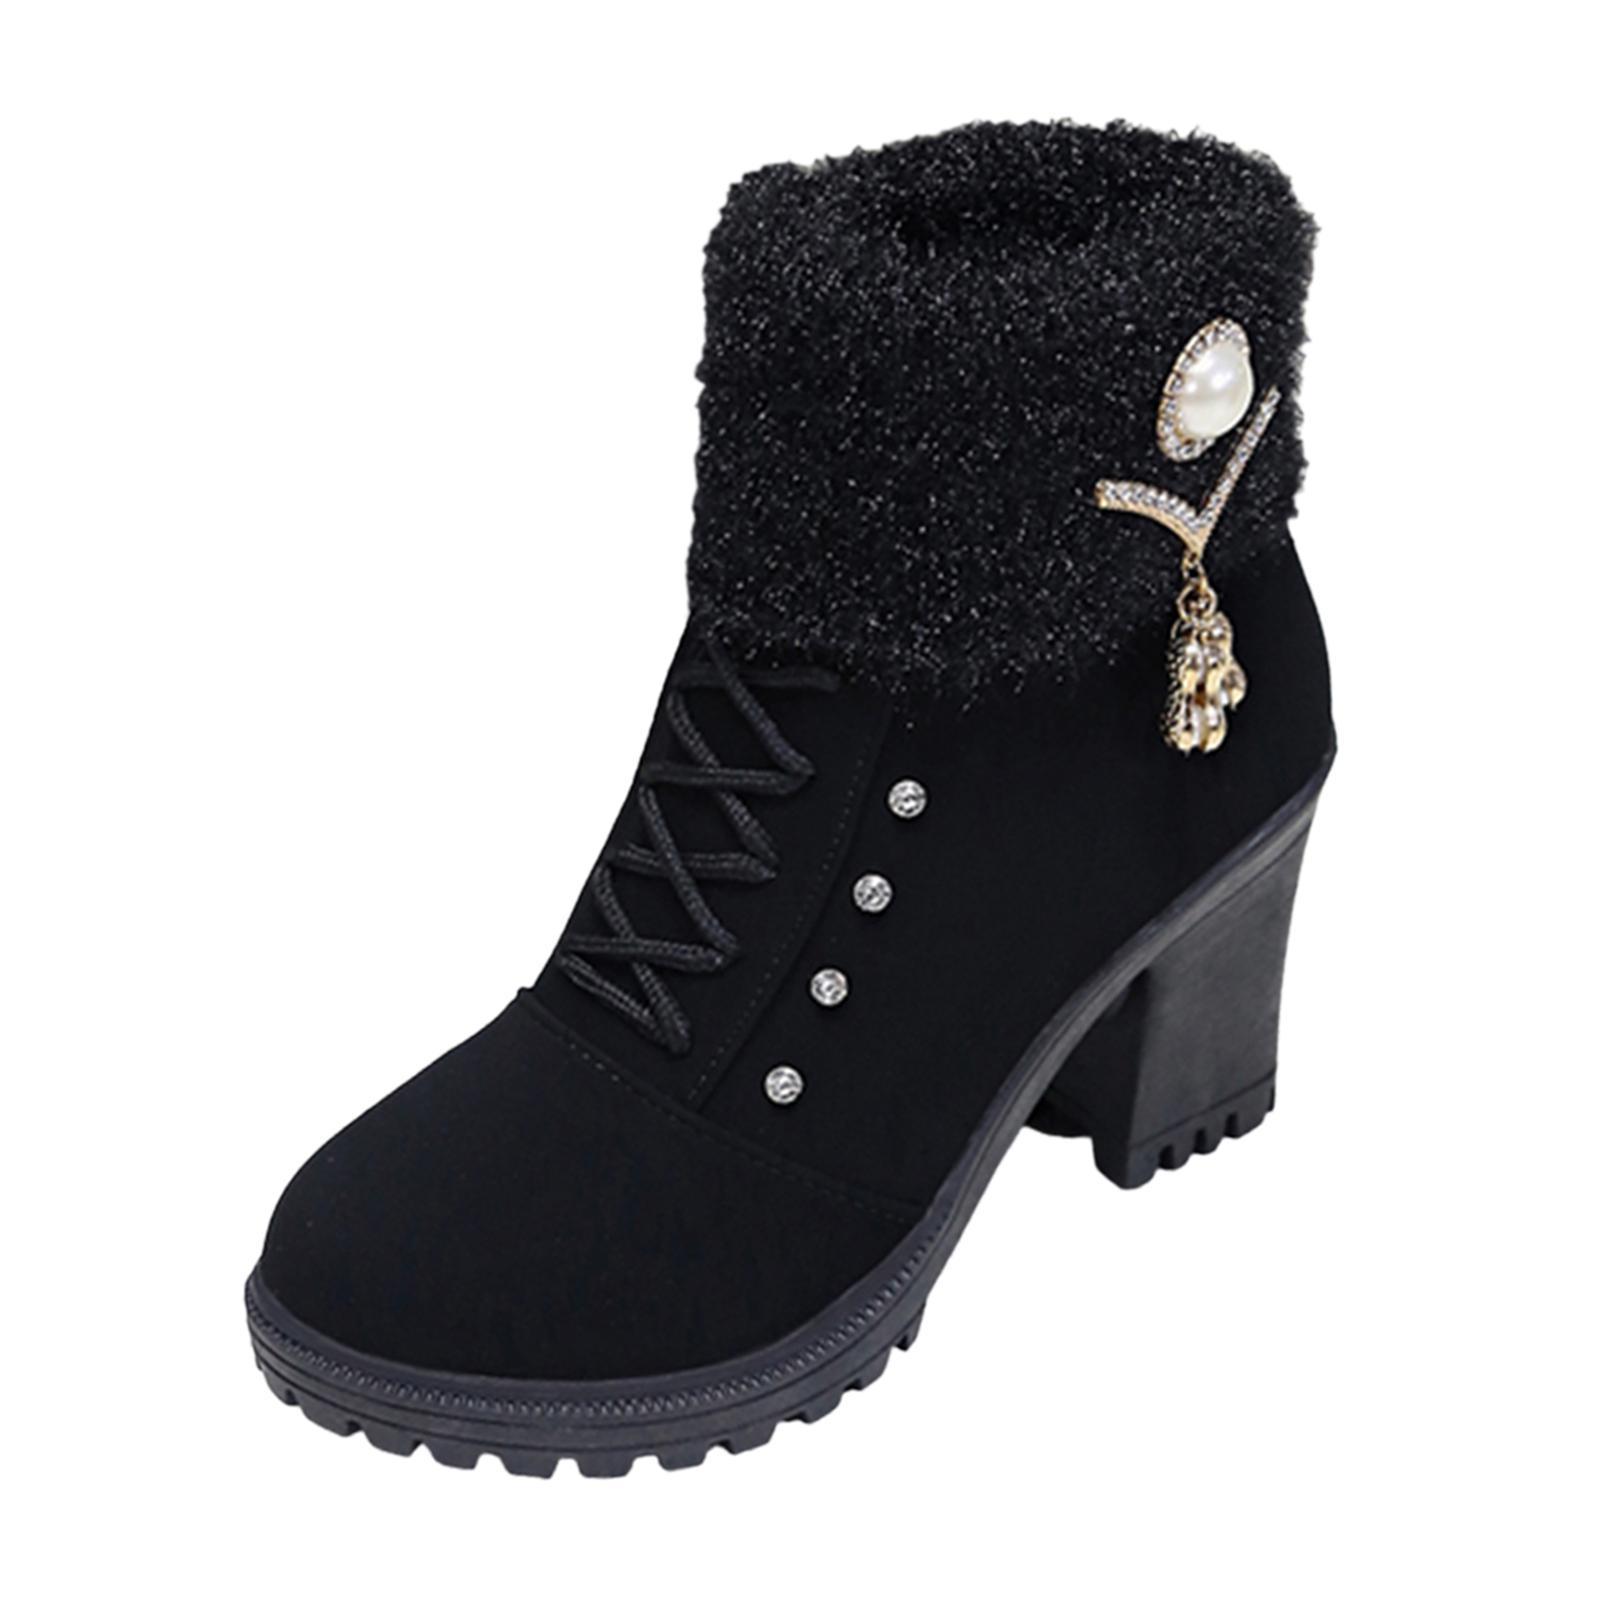 Women Winter Boots Cold Weather High Heeled with Zipper Closure Trendy Shoes